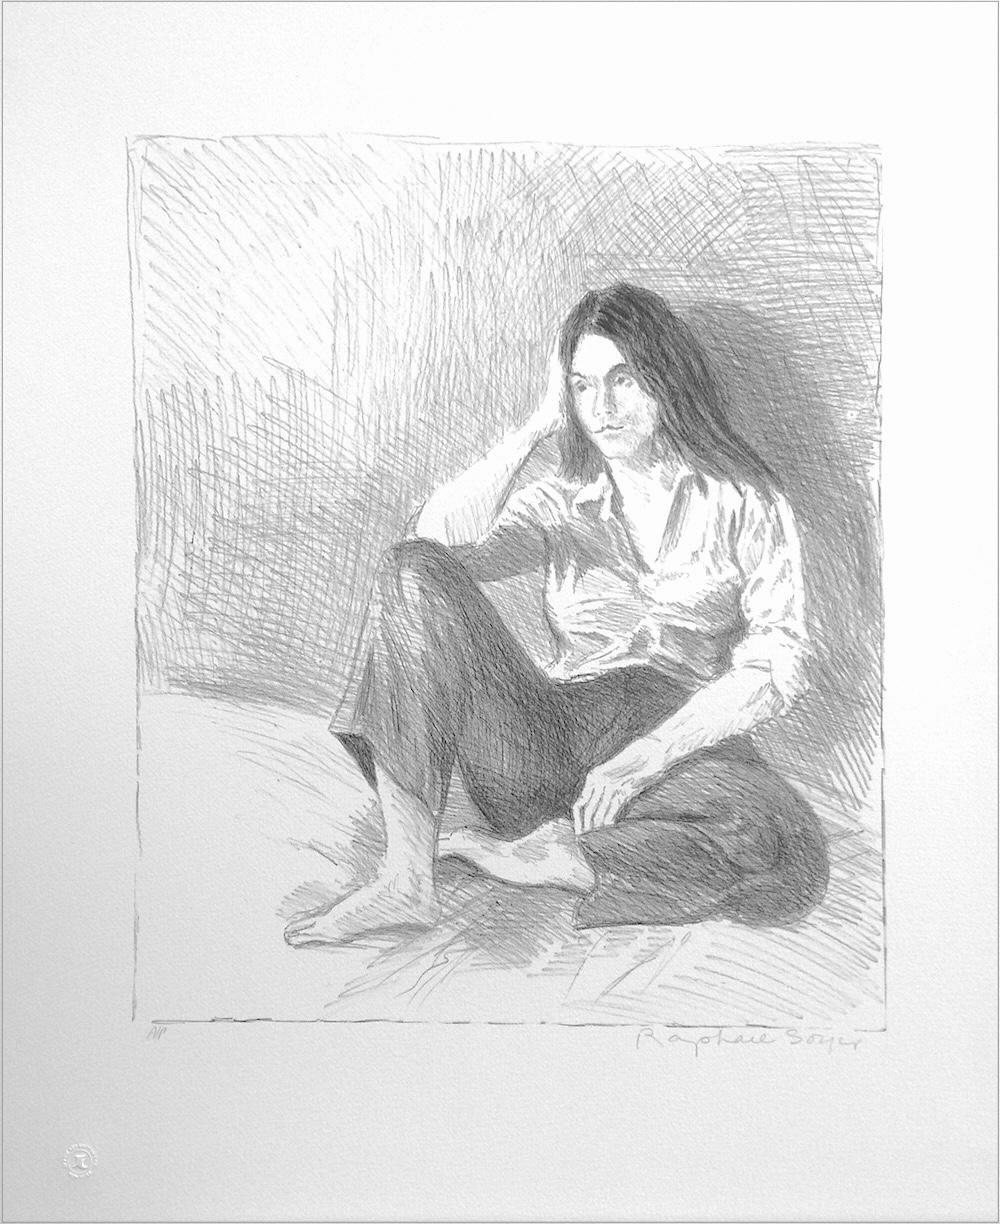 SEATED WOMAN BLUE JEANS Signed Lithograph, Female Portrait, Long Hair, Bare Feet - Print by Raphael Soyer